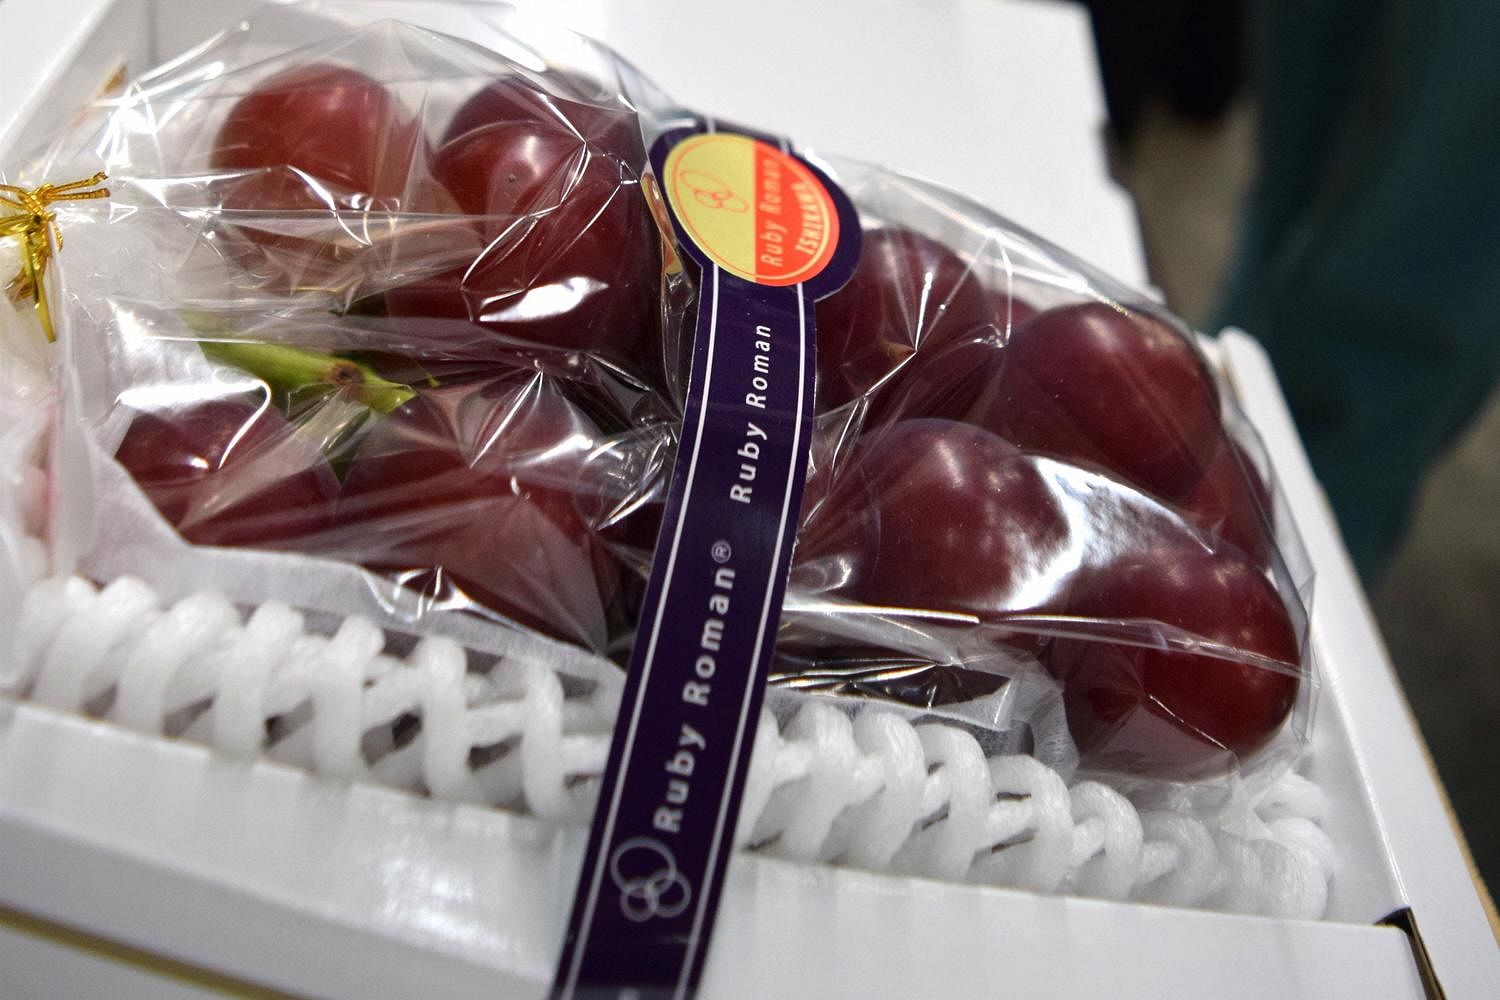 These grapes are expensive than car